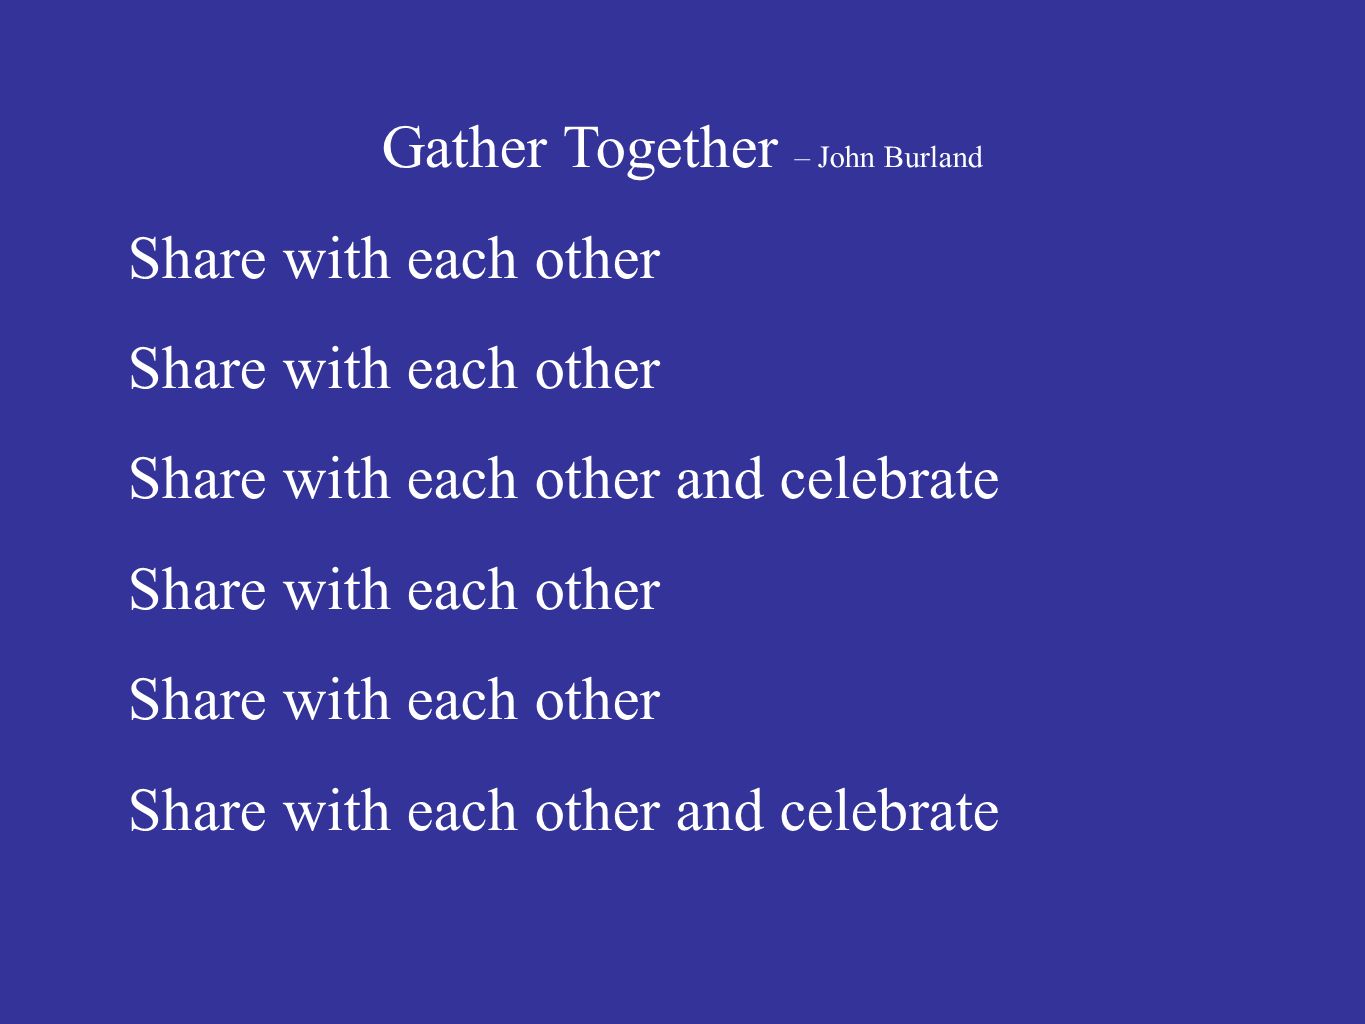 Gather Together – John Burland Share with each other Share with each other and celebrate Share with each other Share with each other and celebrate